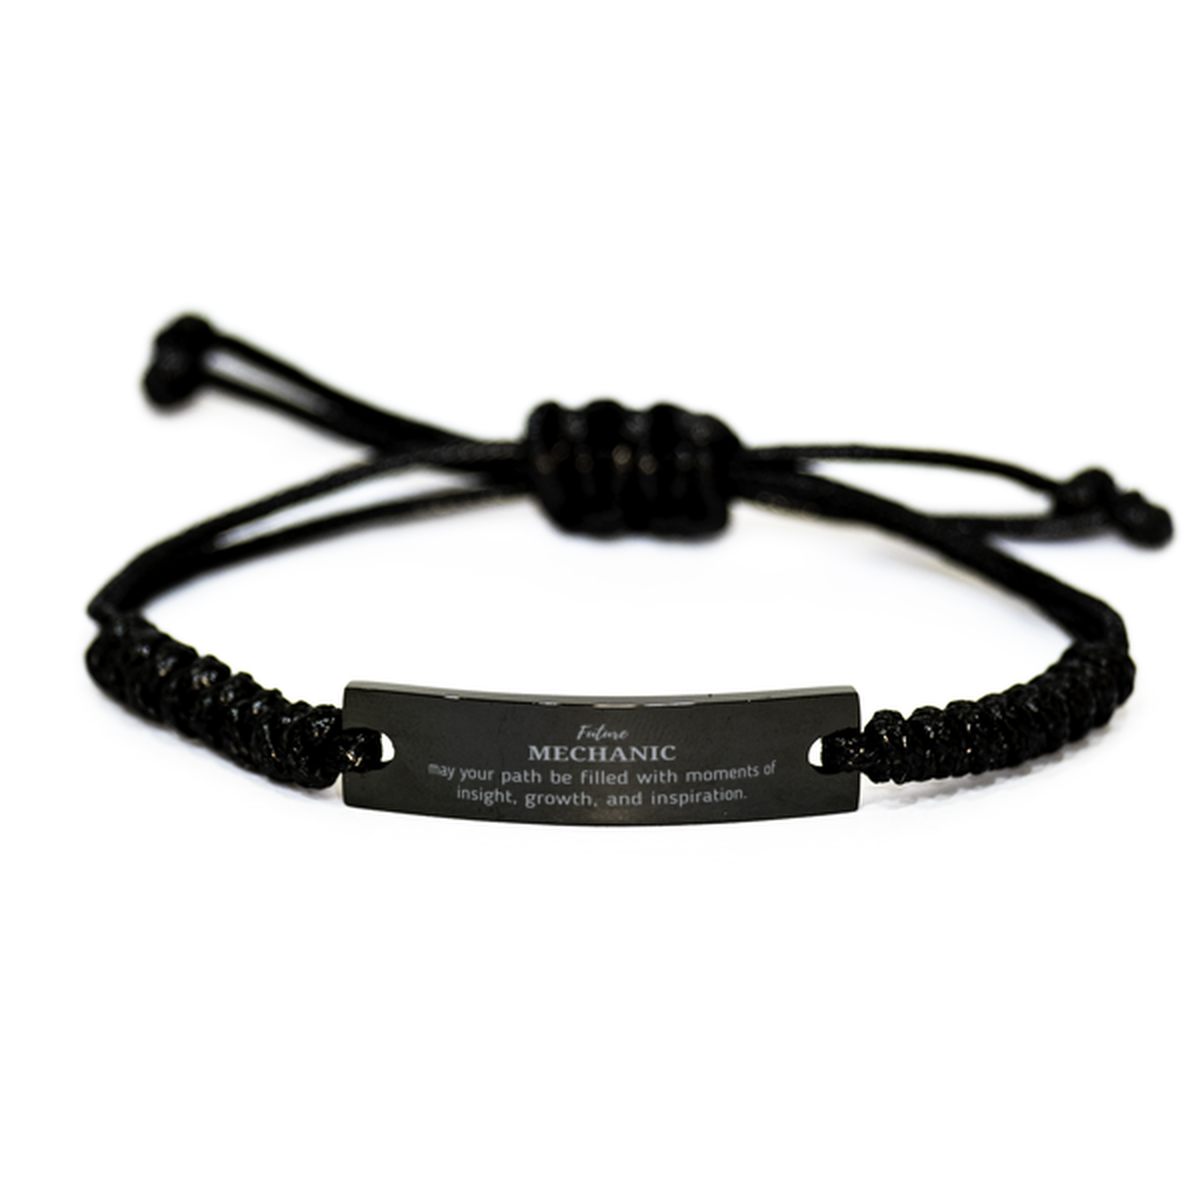 Future Mechanic Gifts, May your path be filled with moments of insight, Graduation Gifts for New Mechanic, Christmas Unique Black Rope Bracelet For Men, Women, Friends